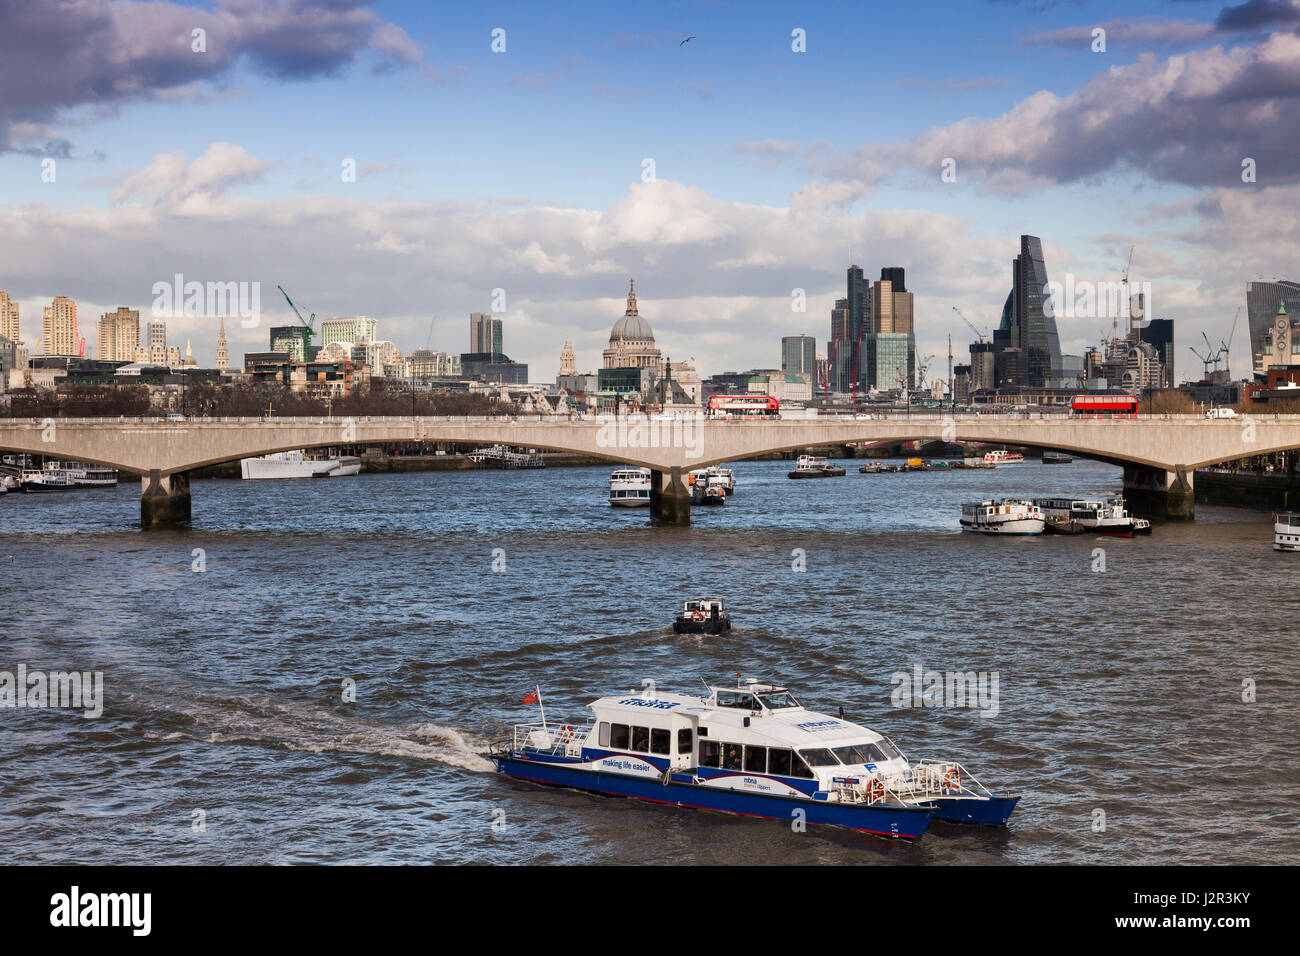 London city skyline with the River Thames and a ferry boat in the foreground Stock Photo